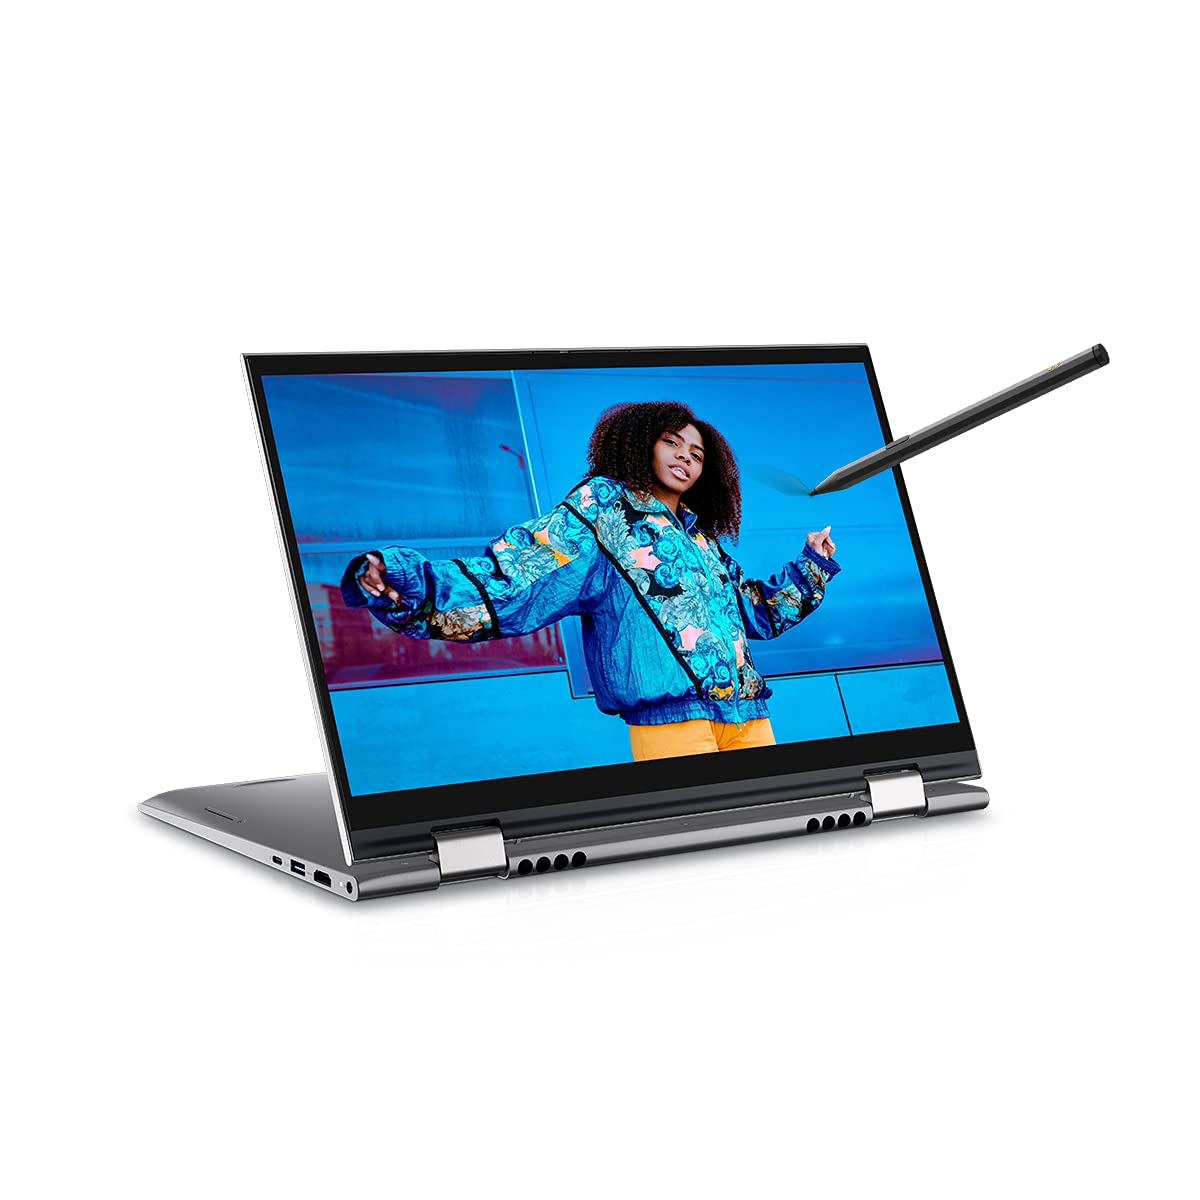 Dell Inspiron 5410 14 inches FHD Touch Display 2in1 Laptop (Intel i3 11th gen/8GB/512GB SSD/Win 10 + MSO/Backlit KB + FPR +.